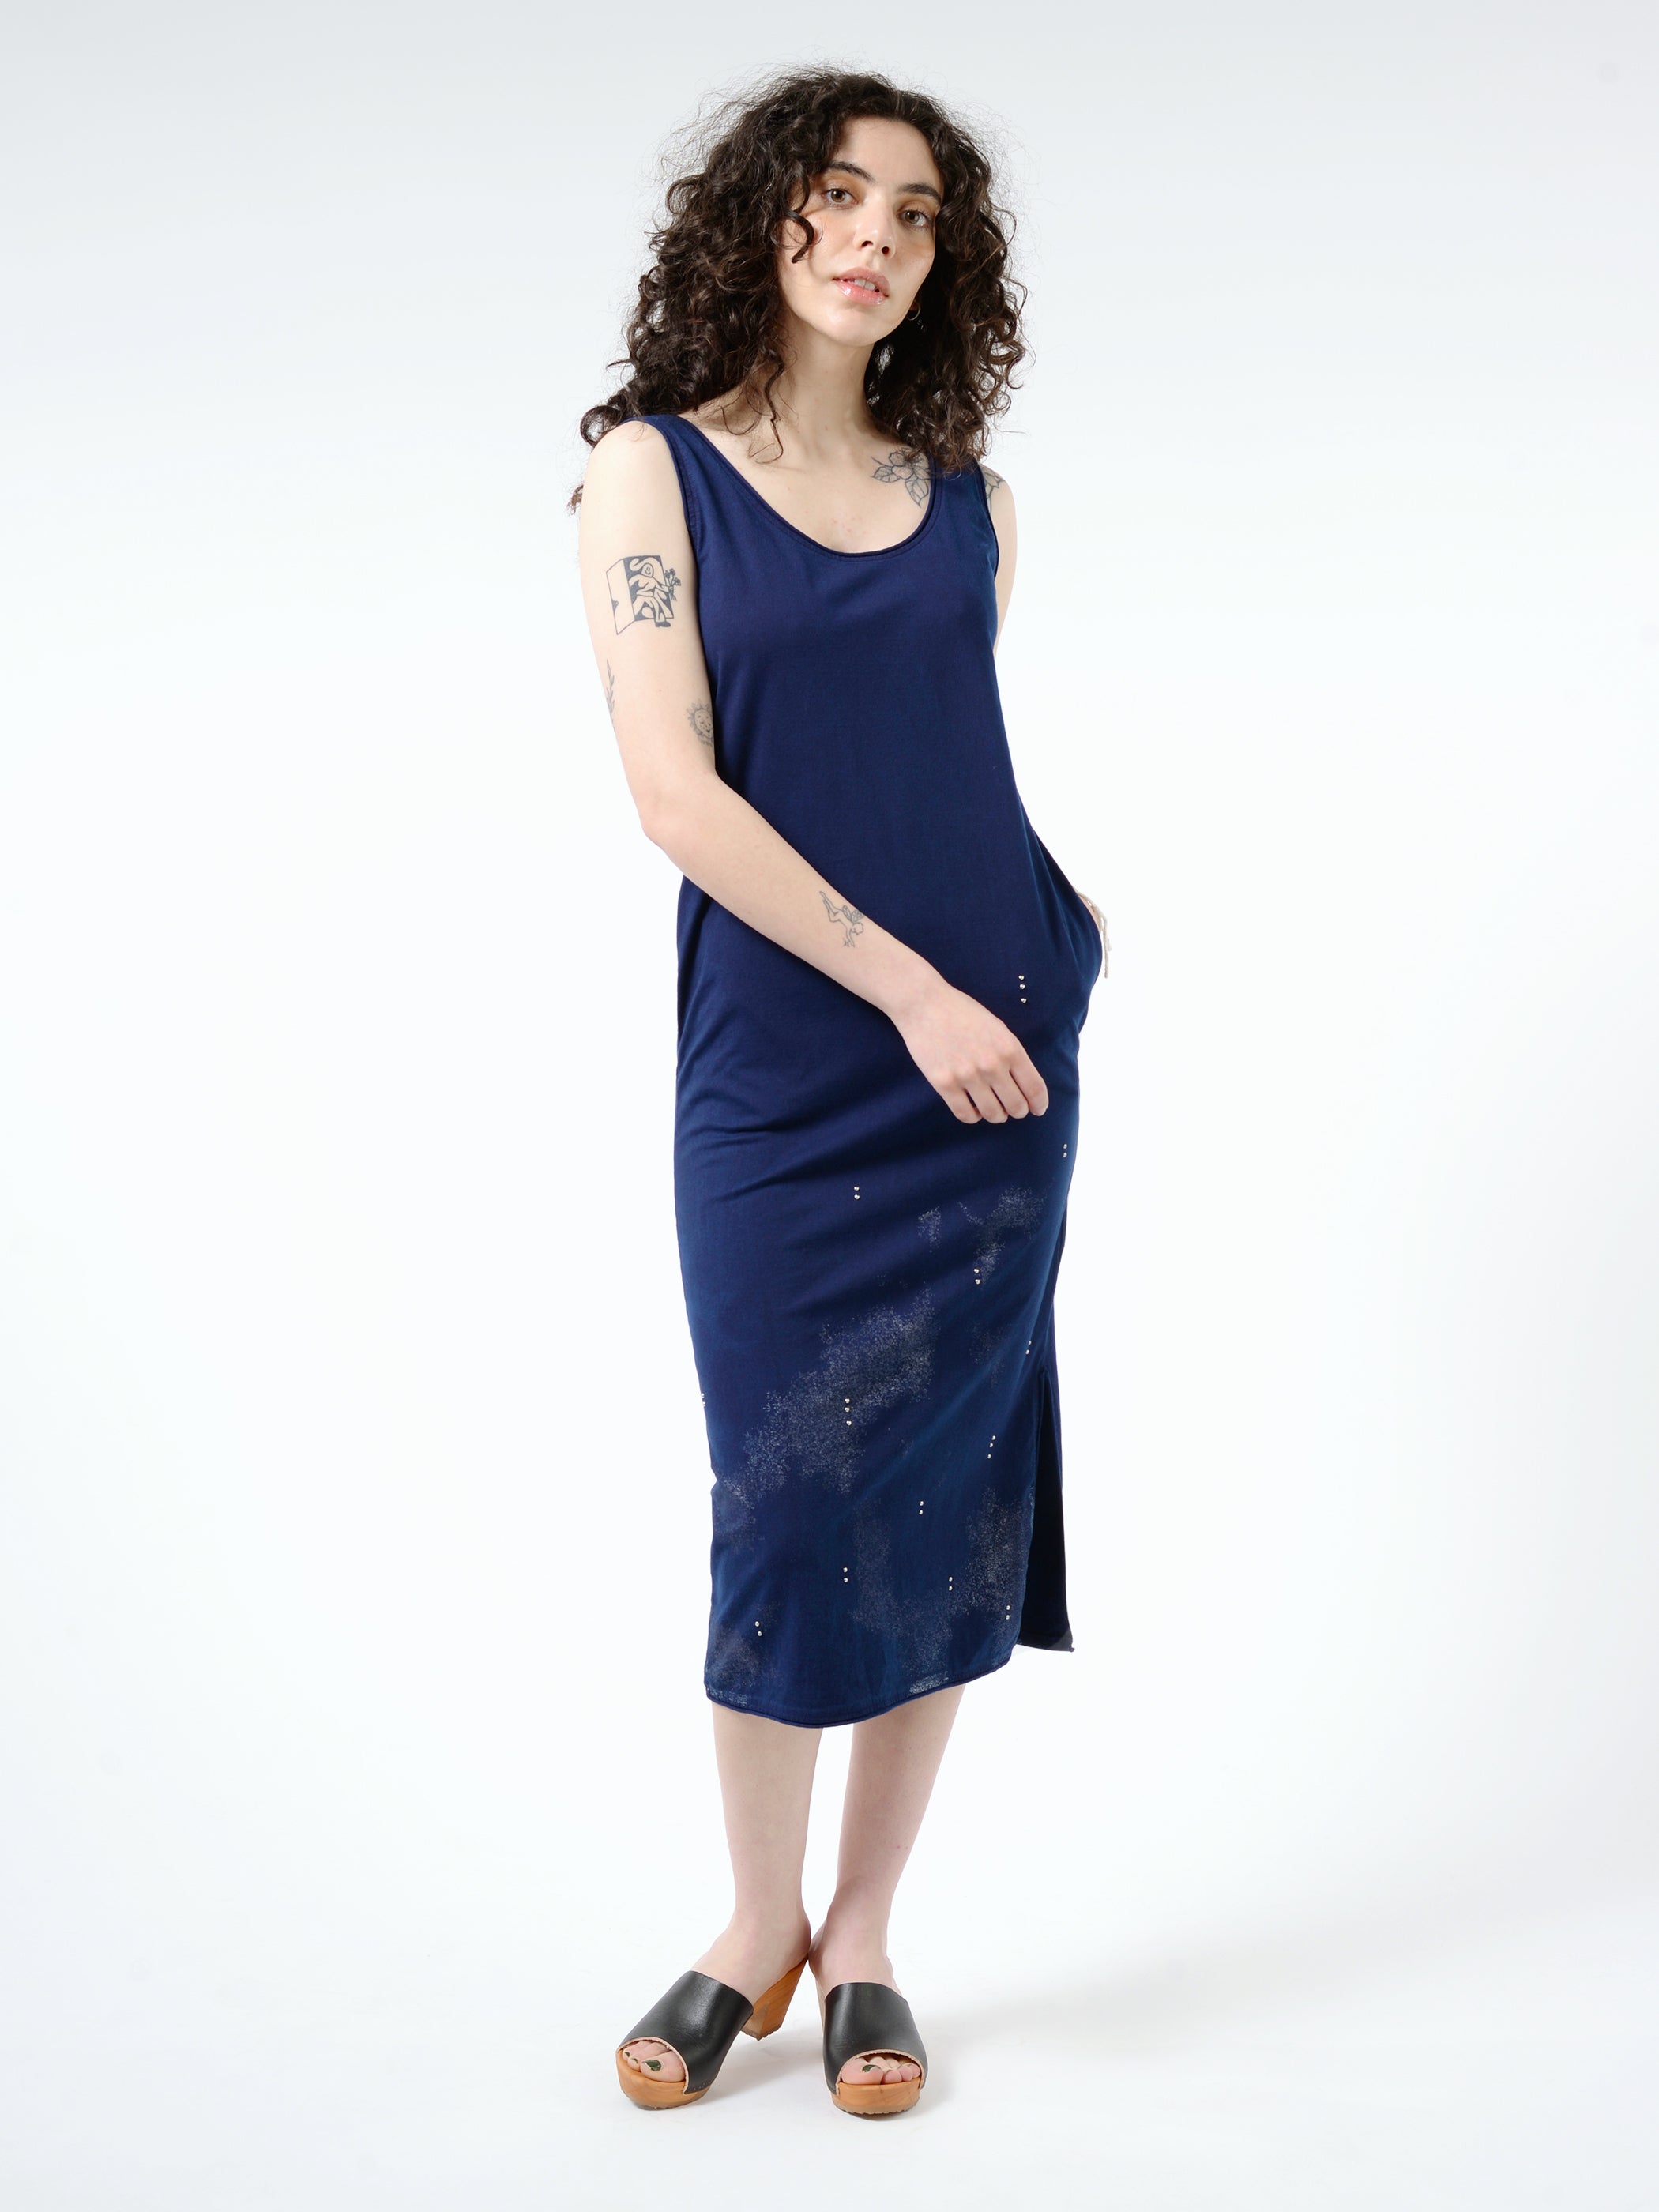 Knitted Foil Printed Indigo Hand Dyed Dress